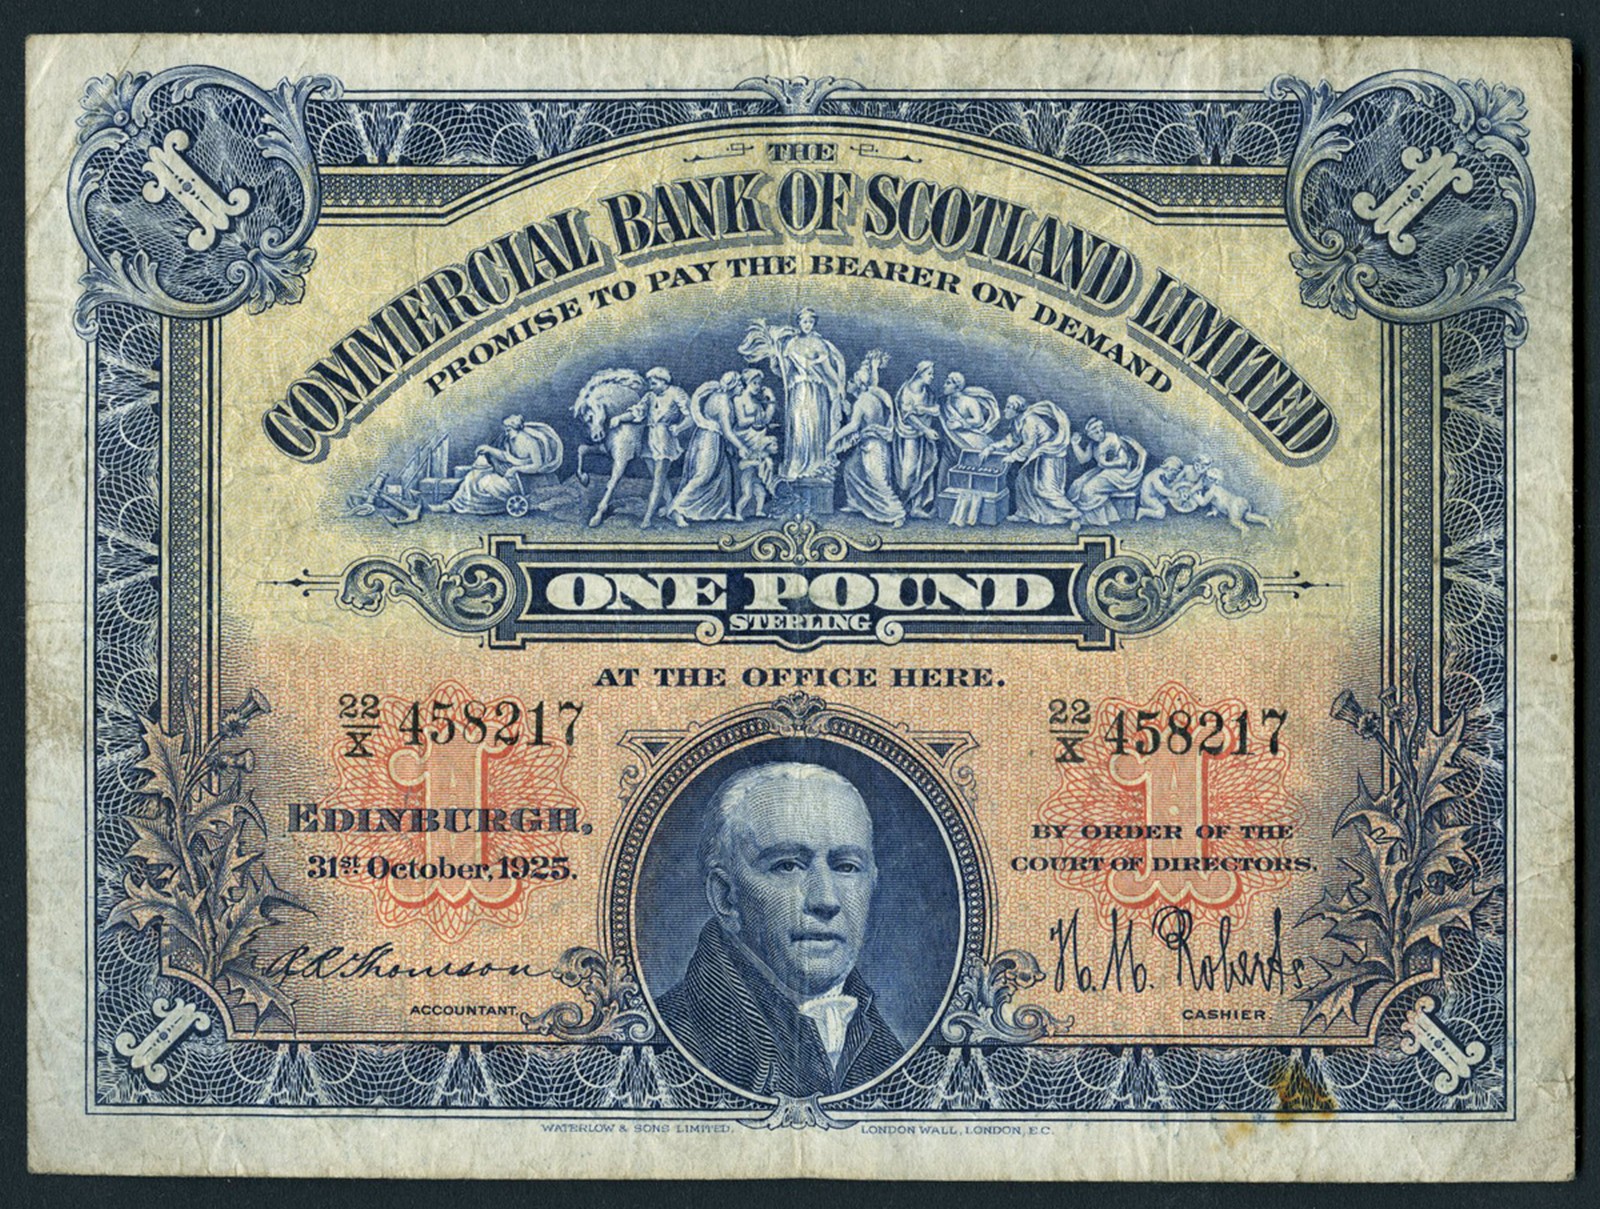 BRITISH BANKNOTES, The Commercial Bank of Scotland Ltd, One Pound, 31 October 1925, 22/X 458217,